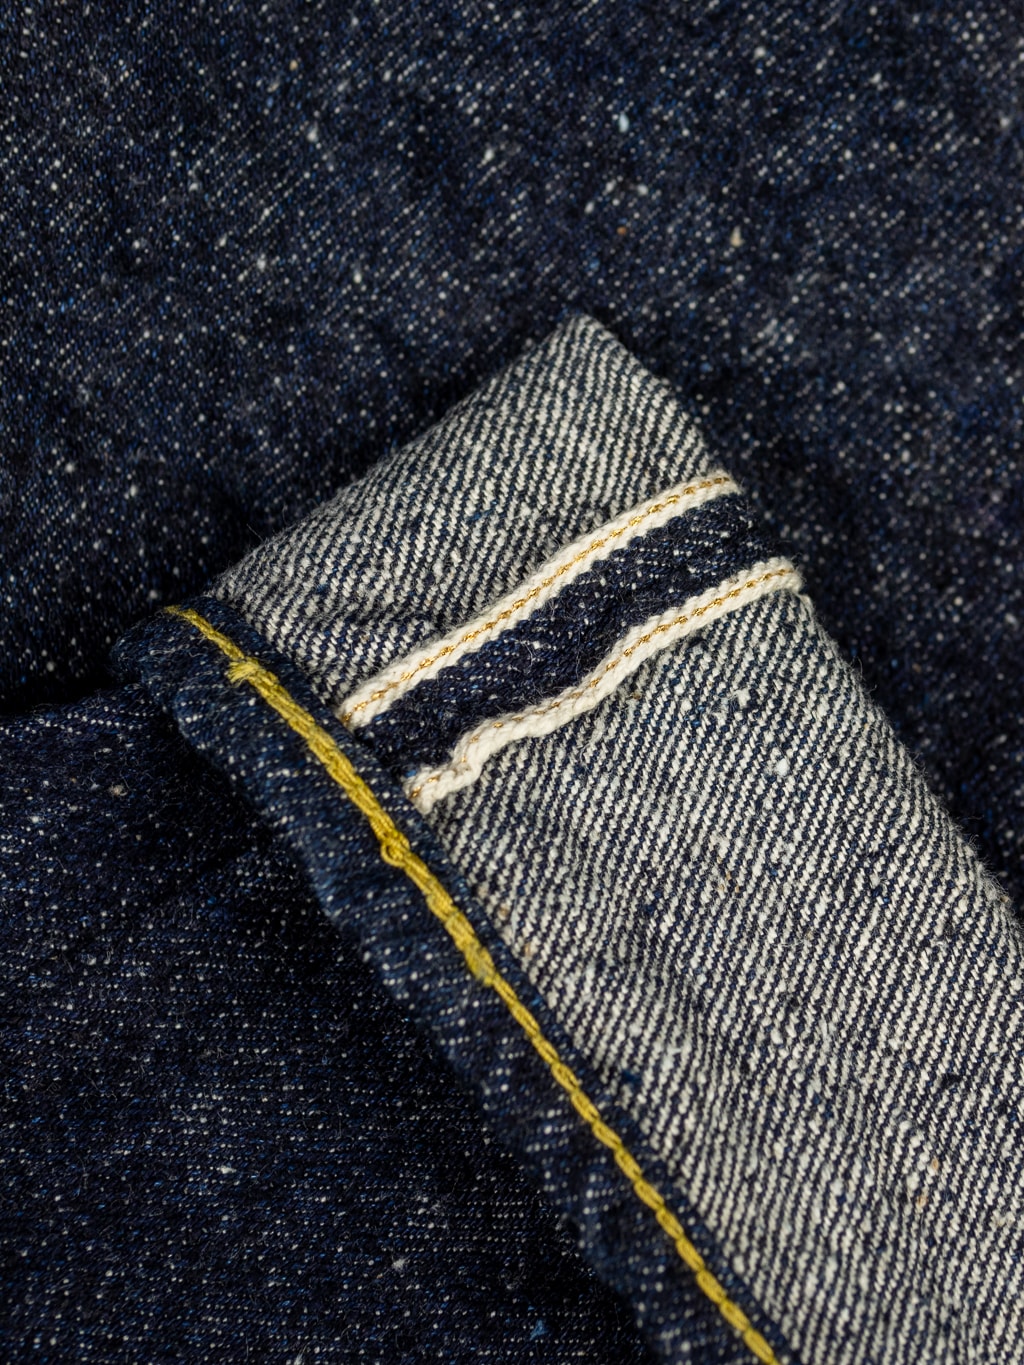 The Strike Gold Keep Earth Natural Indigo Jeans chain stitching